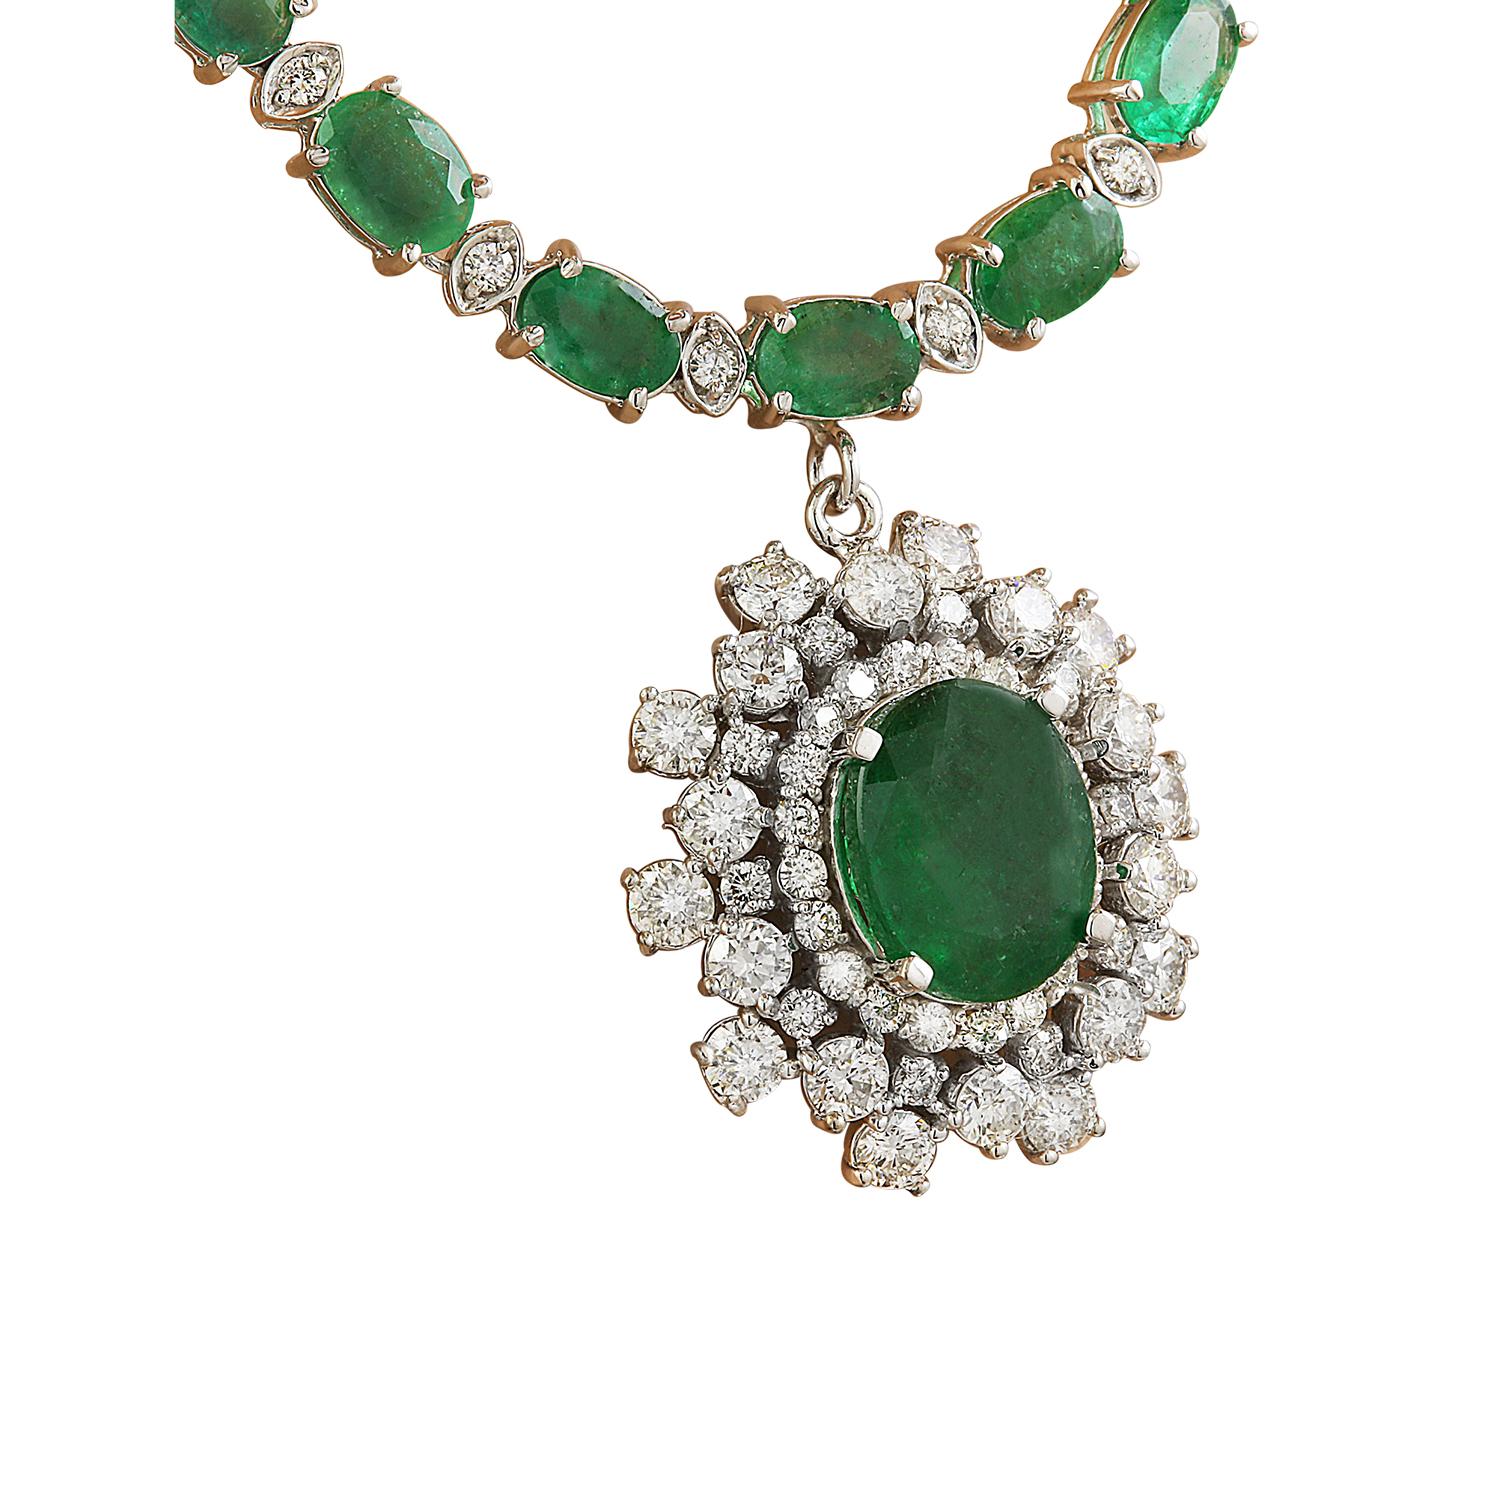 29.96 Carat Natural Emerald 14 Karat Solid White Gold Diamond Necklace
Stamped: 14K
Total Necklace Weight: 28 Grams
Necklace Length: 18 Inches
Center Emerald Weight: 3.38 Carat (11.00x9.00 Millimeters)
Side Emerald weight: 22.60 Carat (6.00x4.00